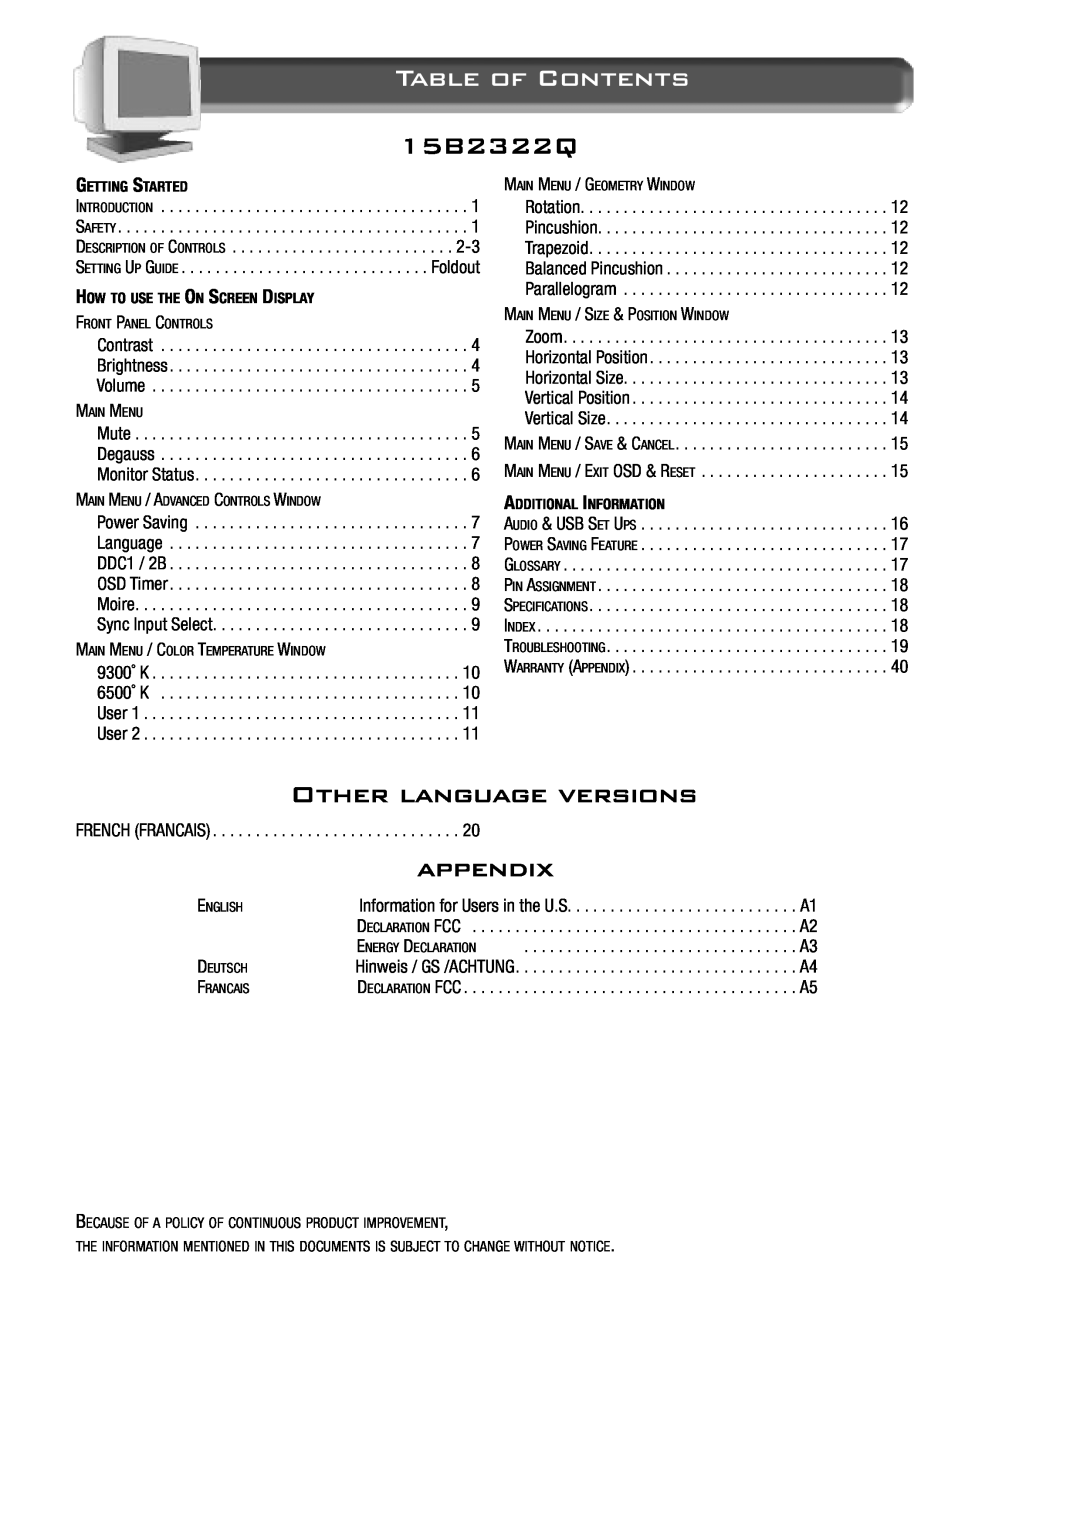 Philips 15B2322Q appendix Table of Contents, Other language versions 